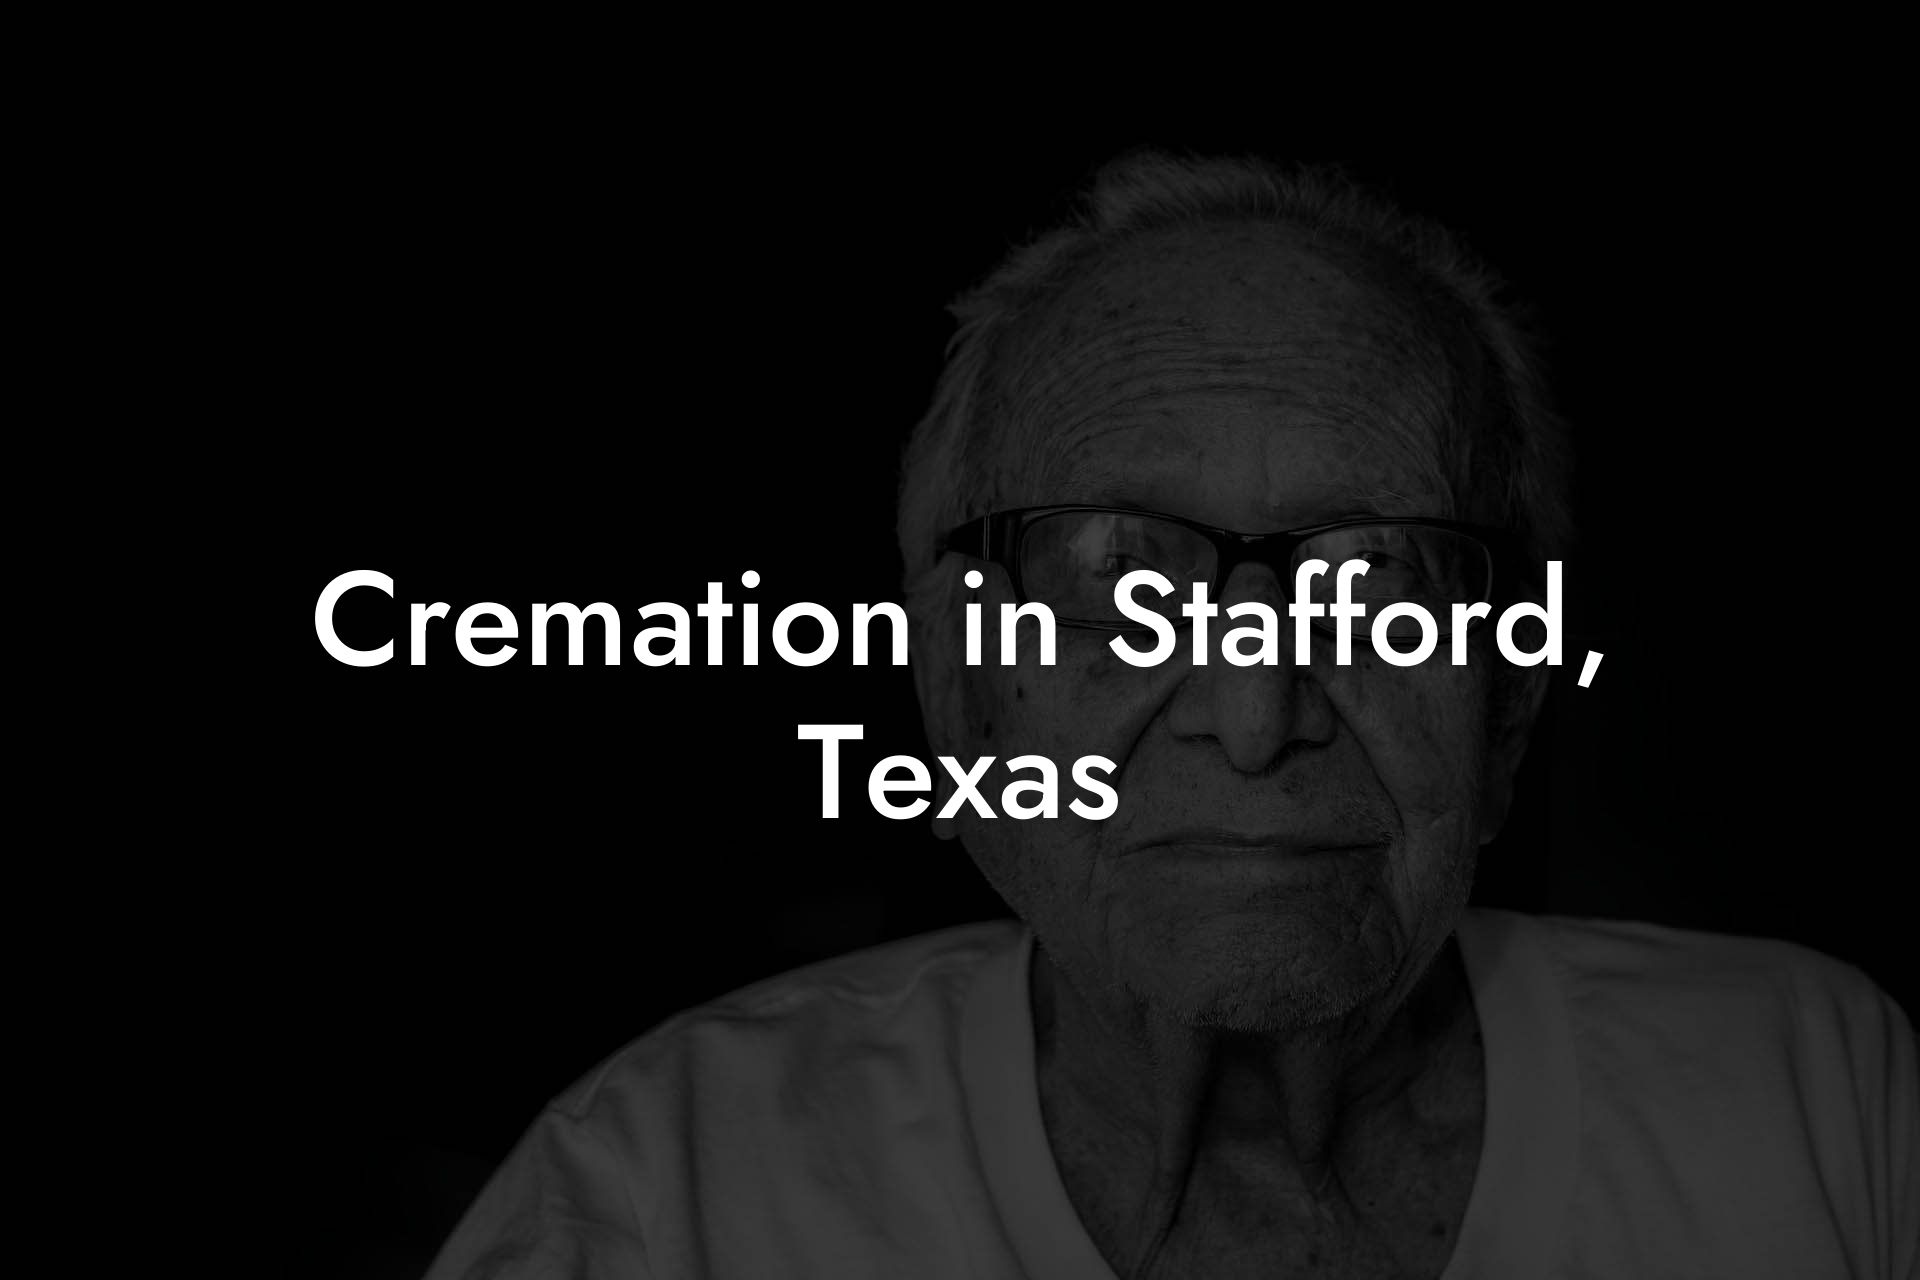 Cremation in Stafford, Texas